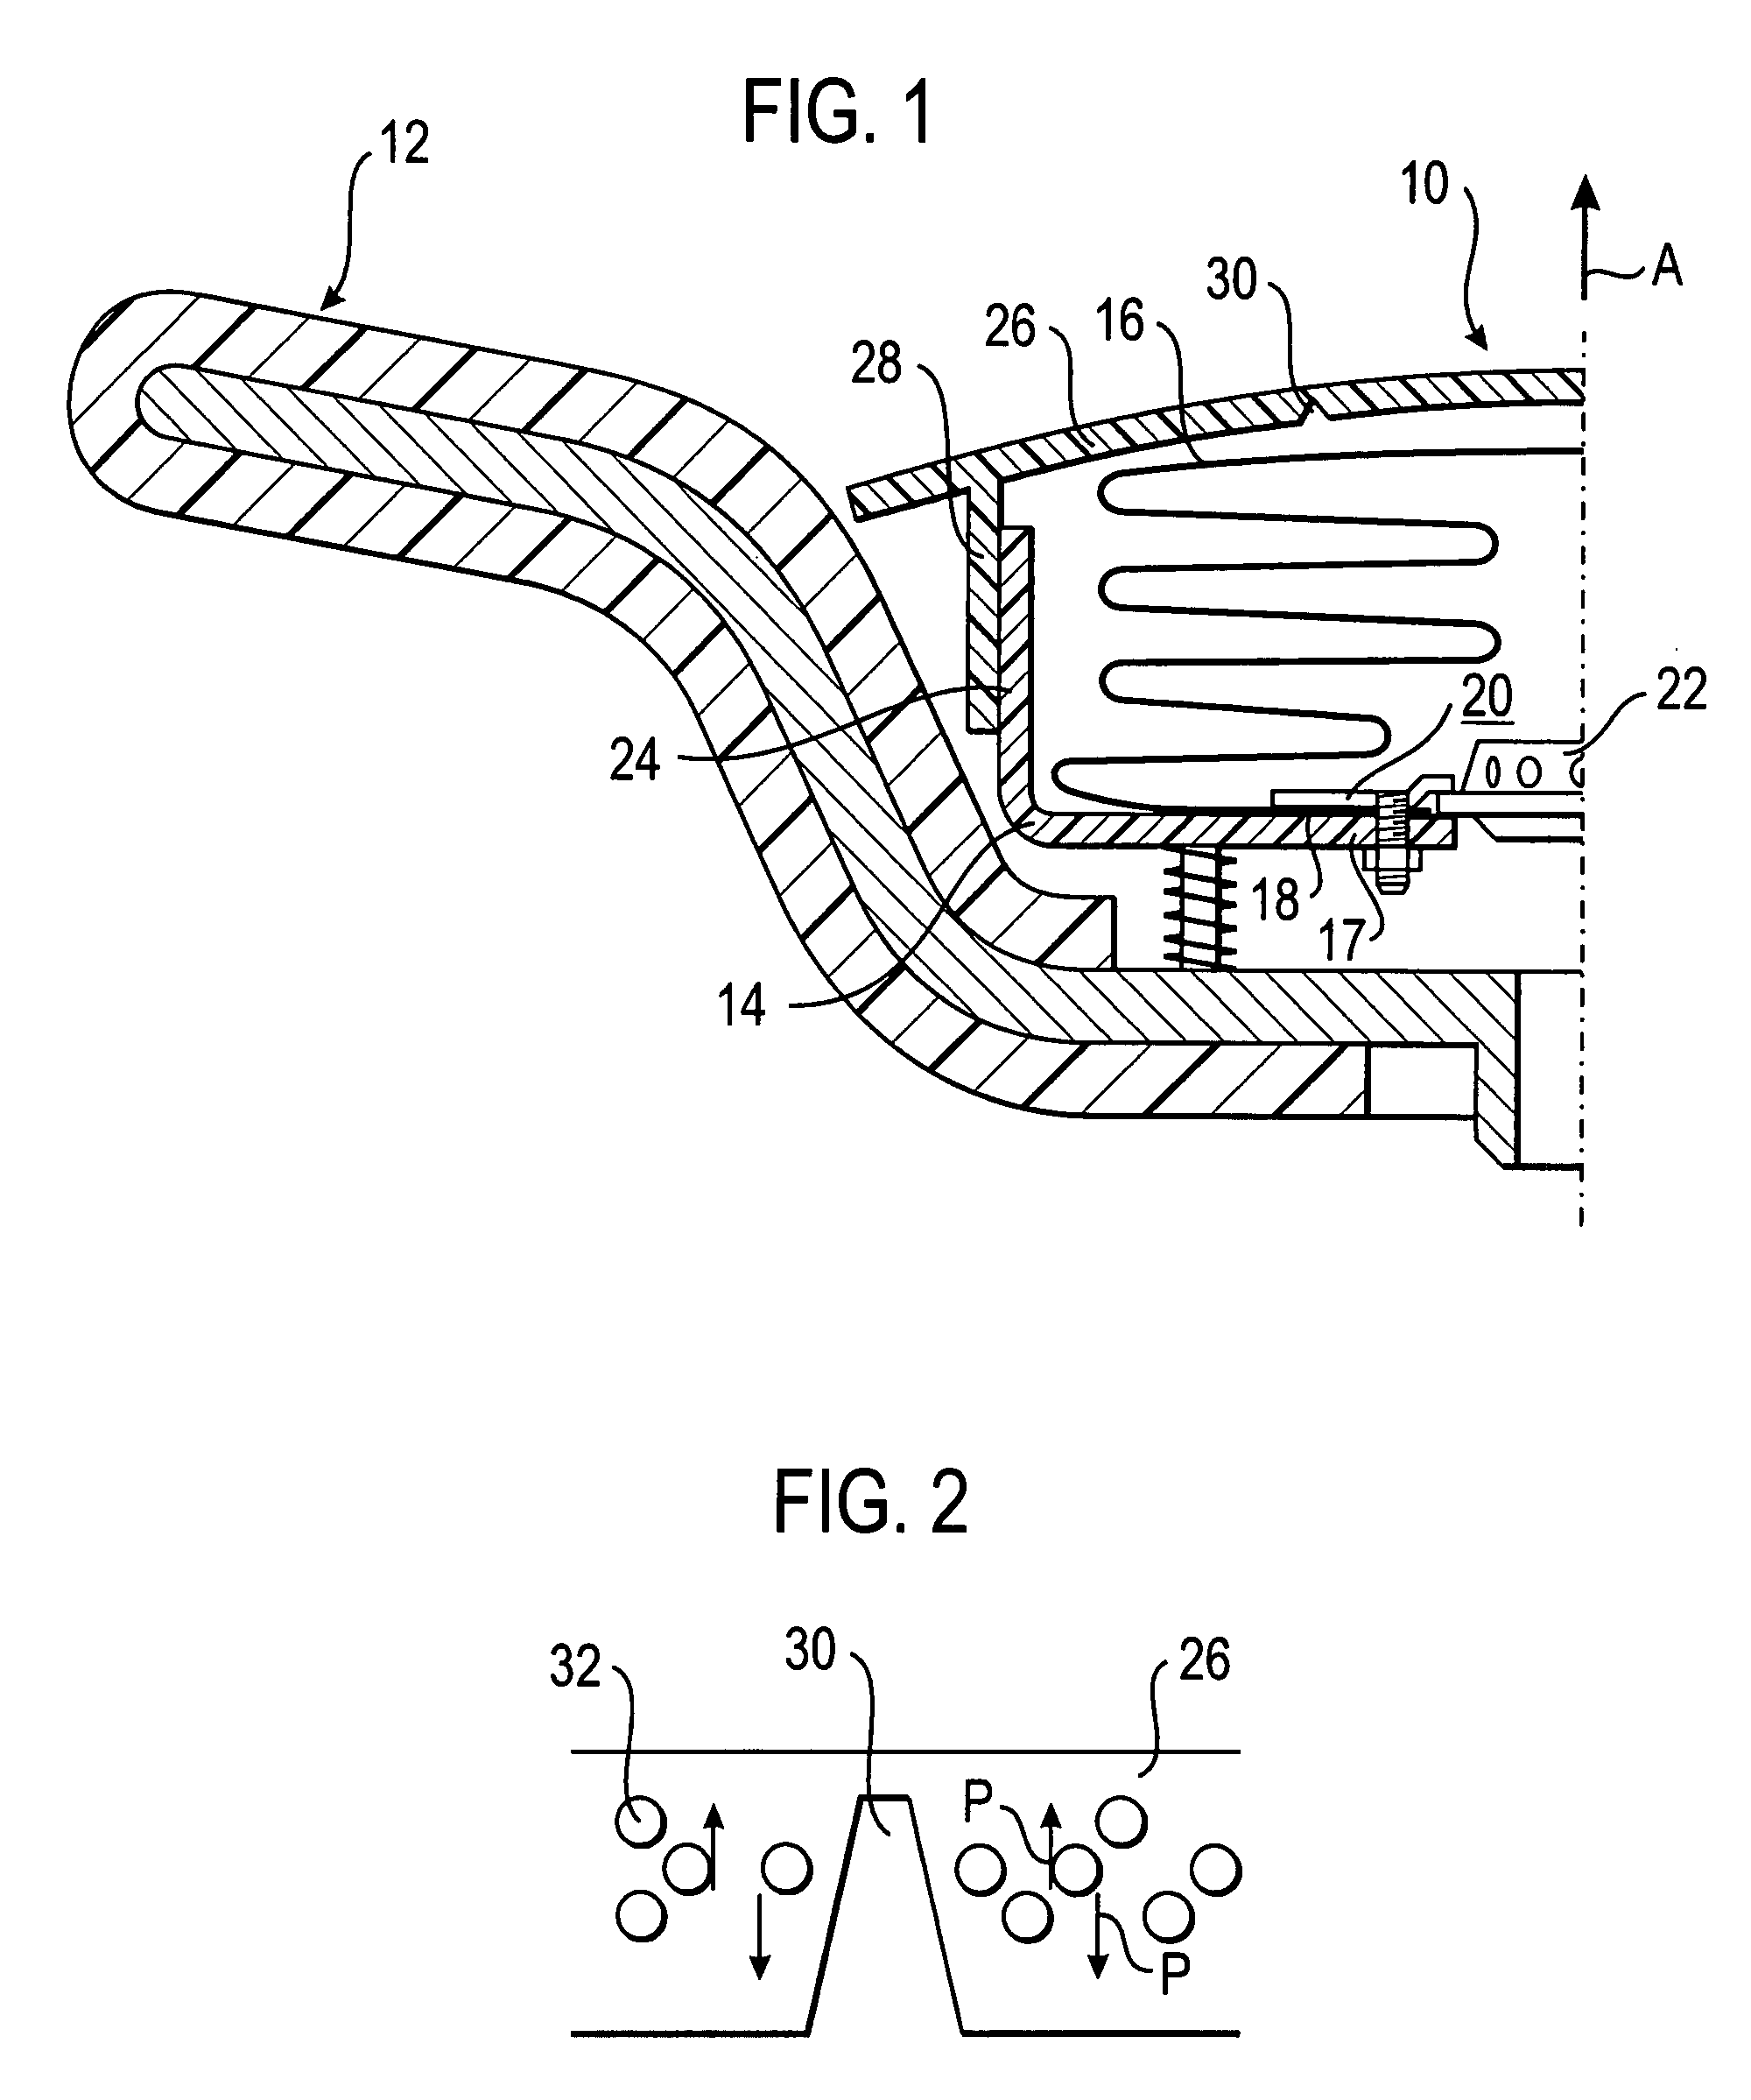 Gas bag module for a vehicle occupant restraint system